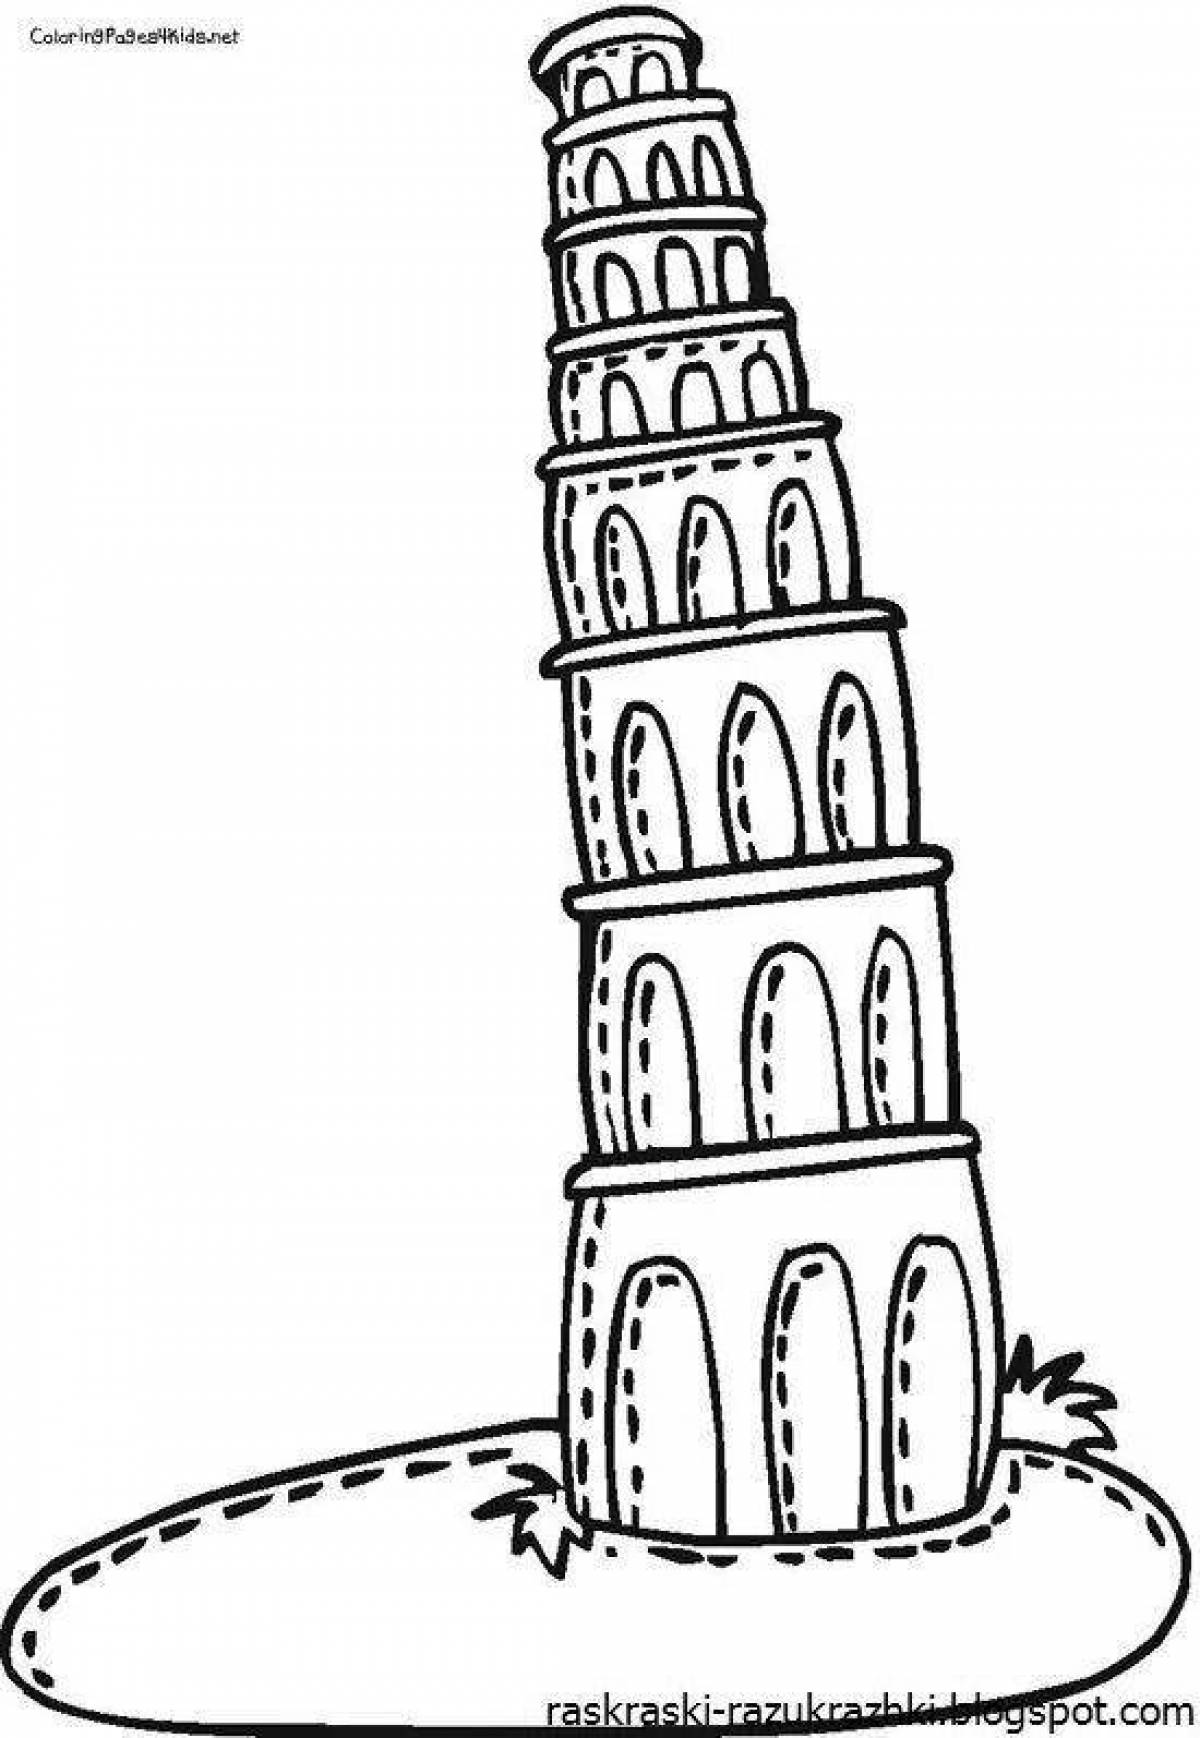 Radiant coloring page of Leaning Tower of Pisa